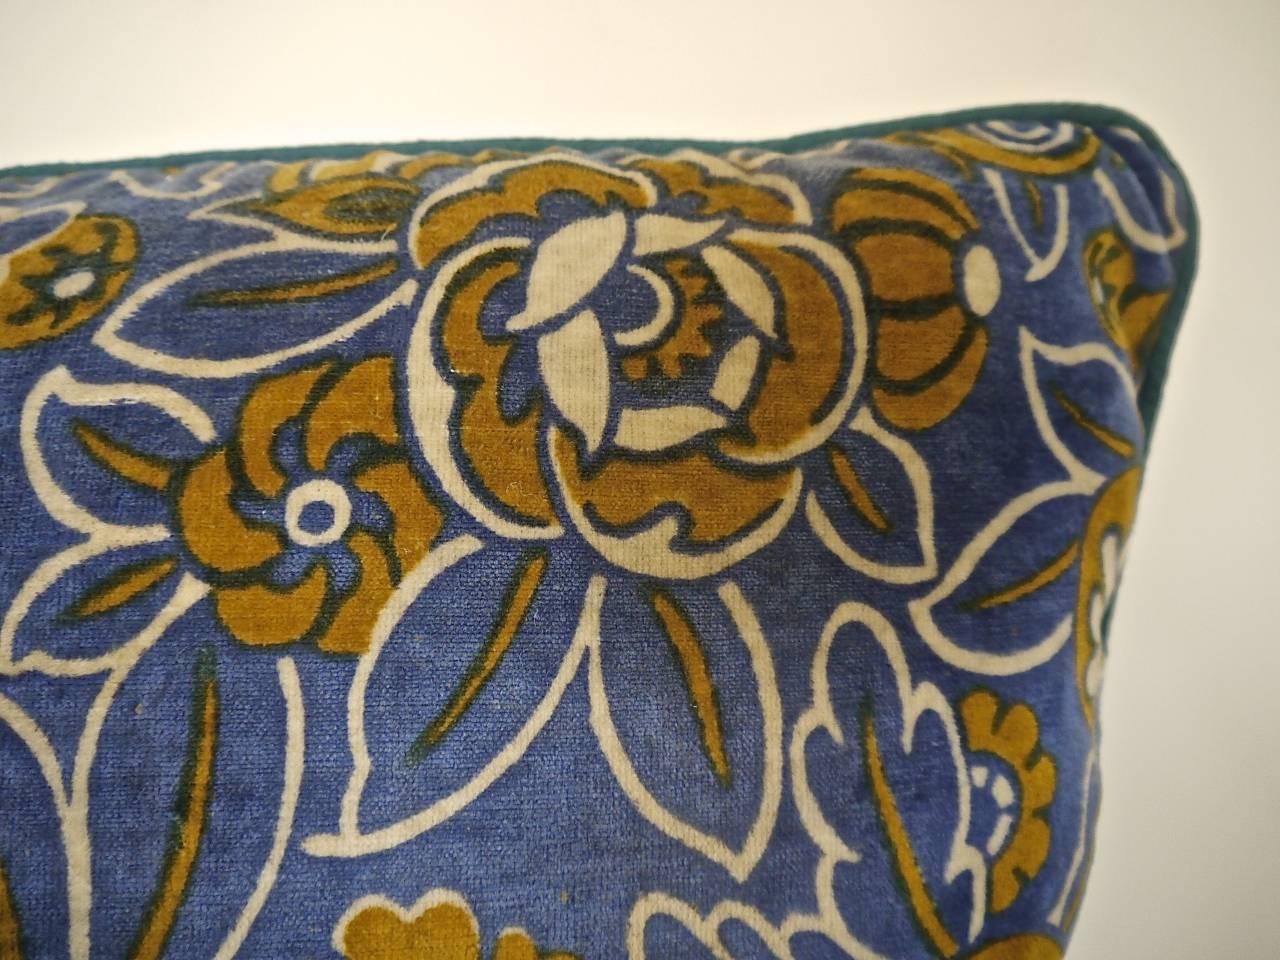 20th Century French 1920s Art Deco Tan and Blue Floral Velvet Cushion For Sale